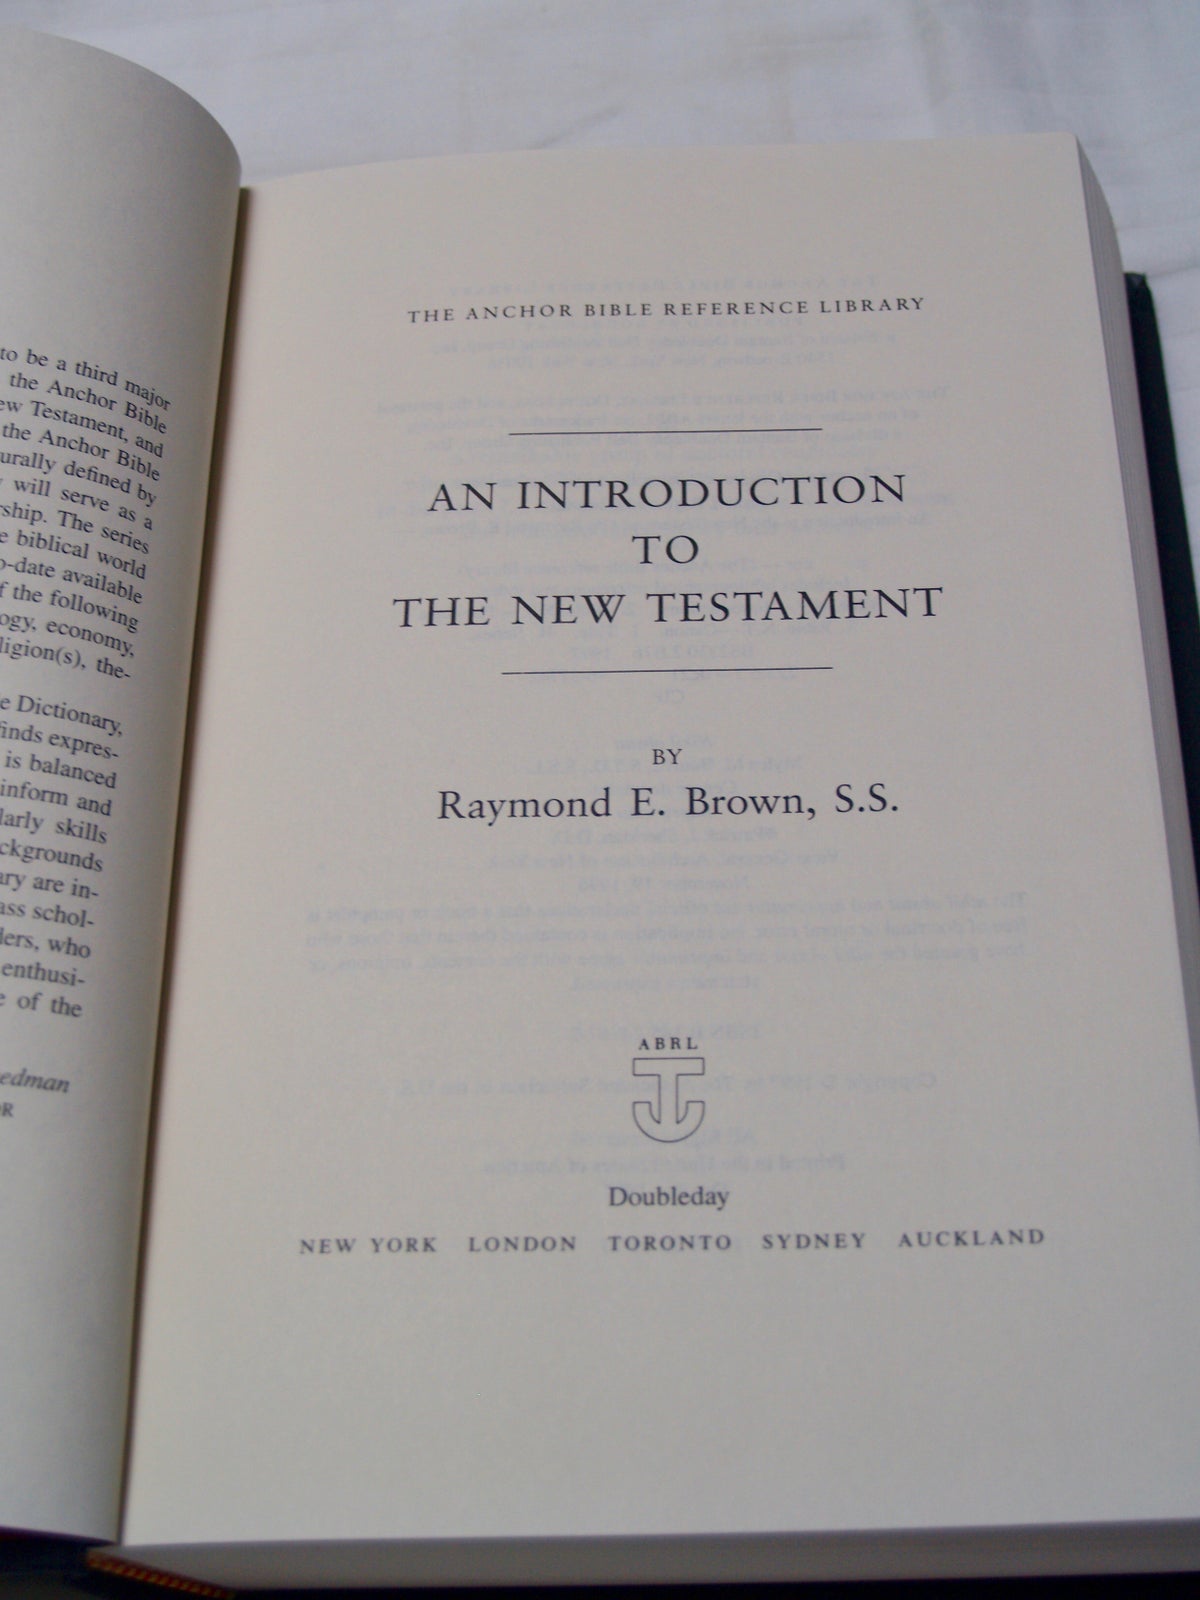 An Introduction to, the New Testament